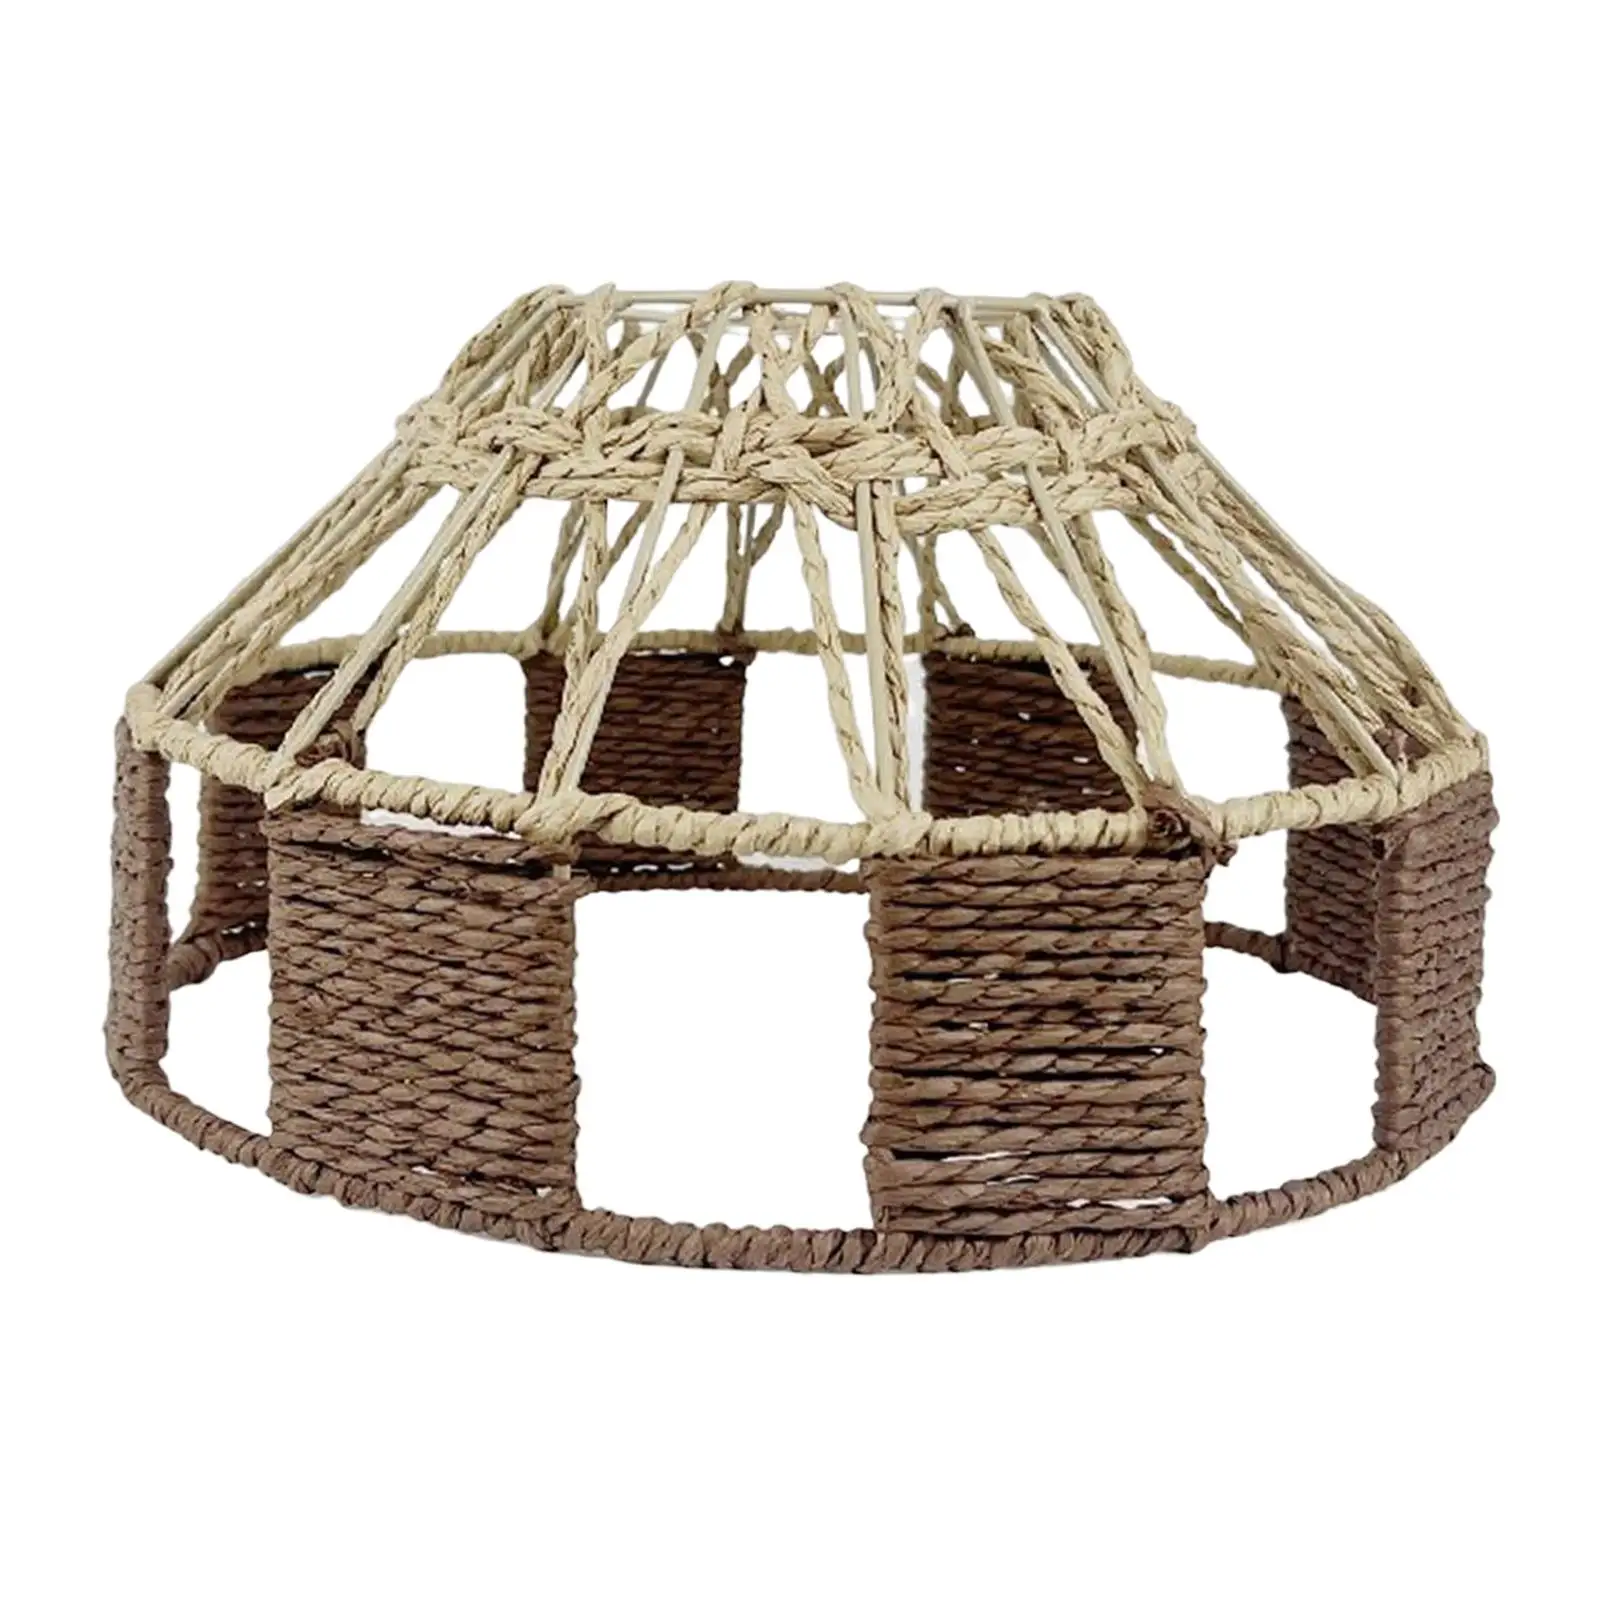 Rustic Boho Handwoven Wicker Lampshade Pendant Lamp Shade Paper Rope Rattan Lampshade for Living Room Farmhouse Ceiling Bedroom